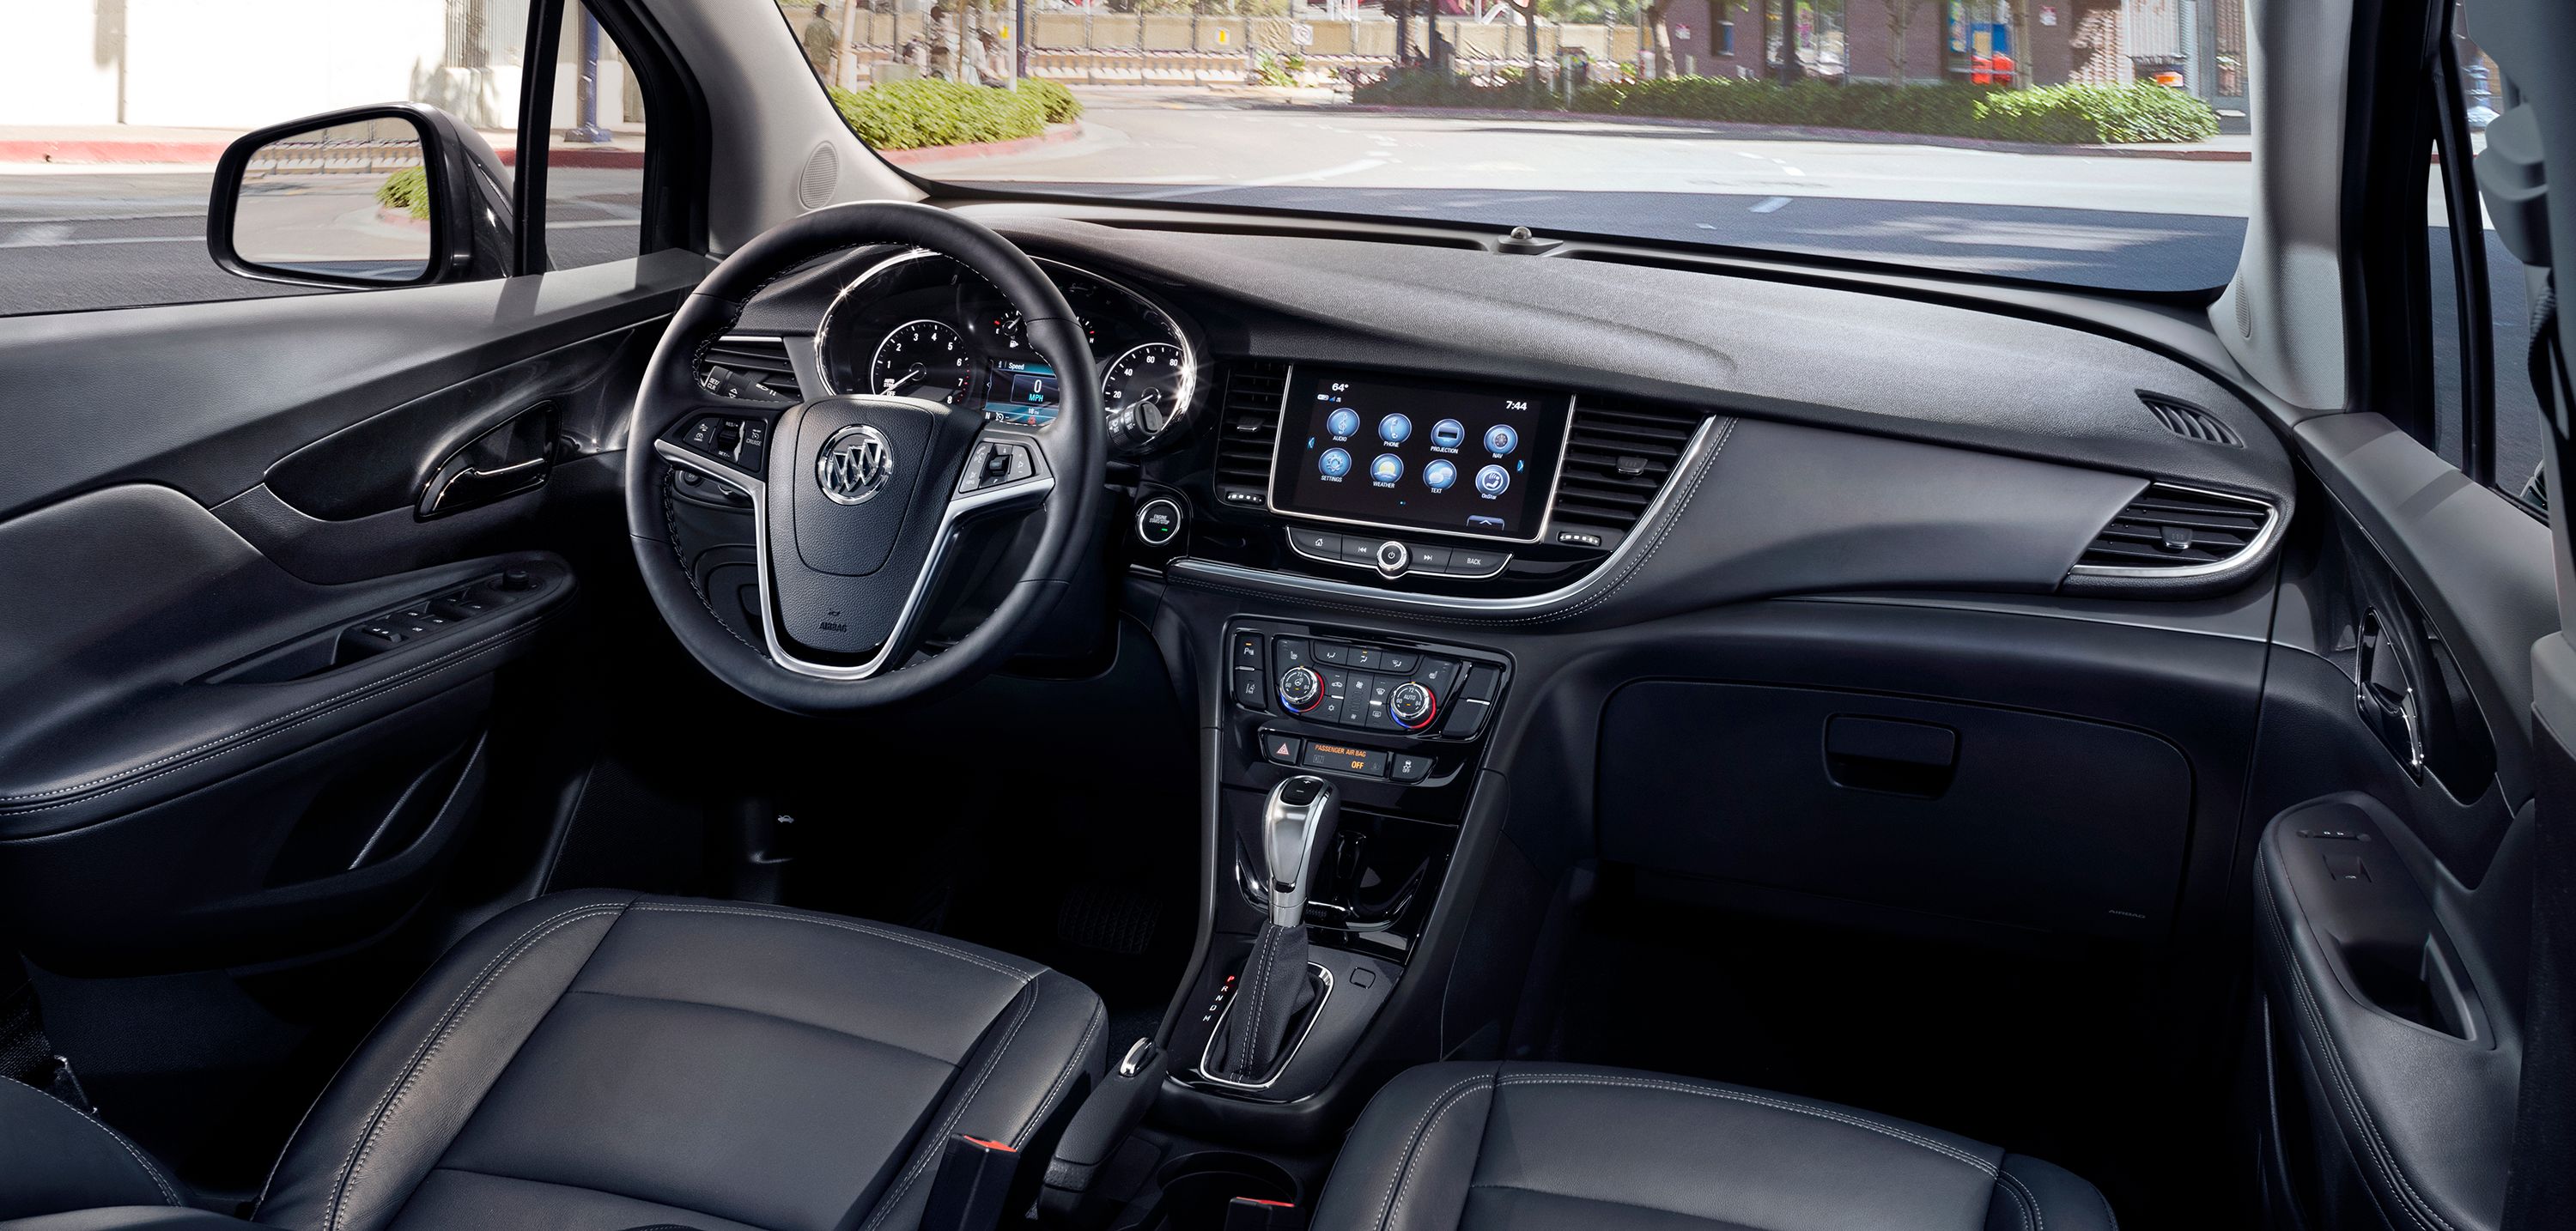 The interior of the 2017 Buick Encore.